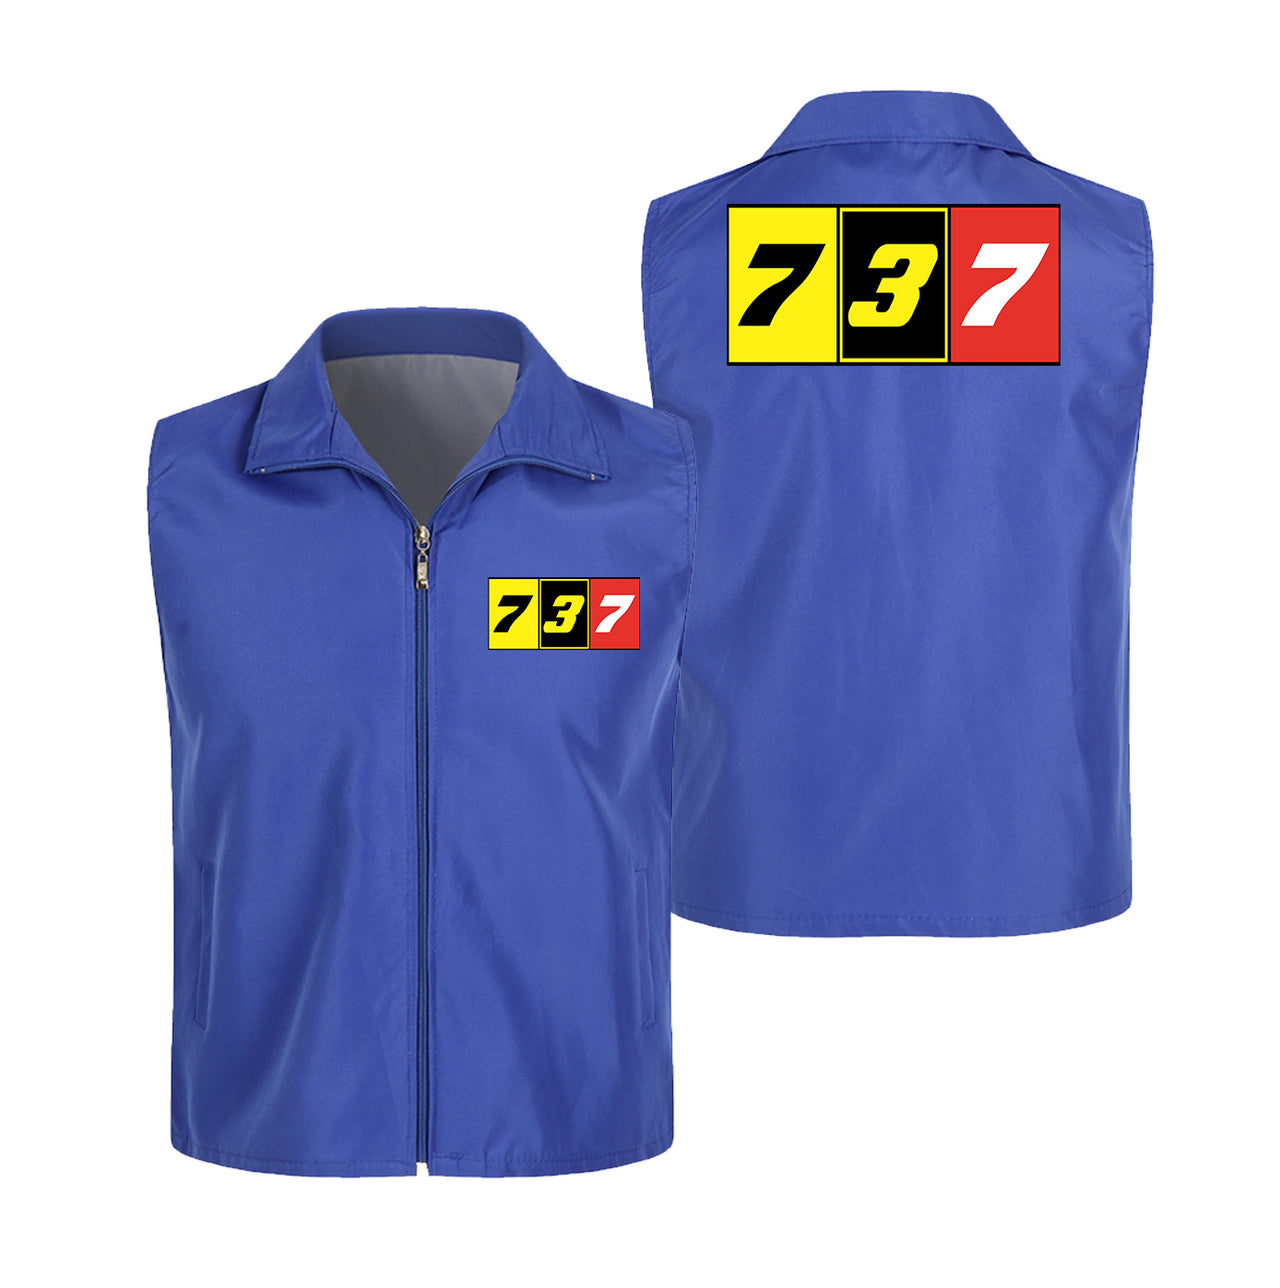 Flat Colourful 737 Designed Thin Style Vests